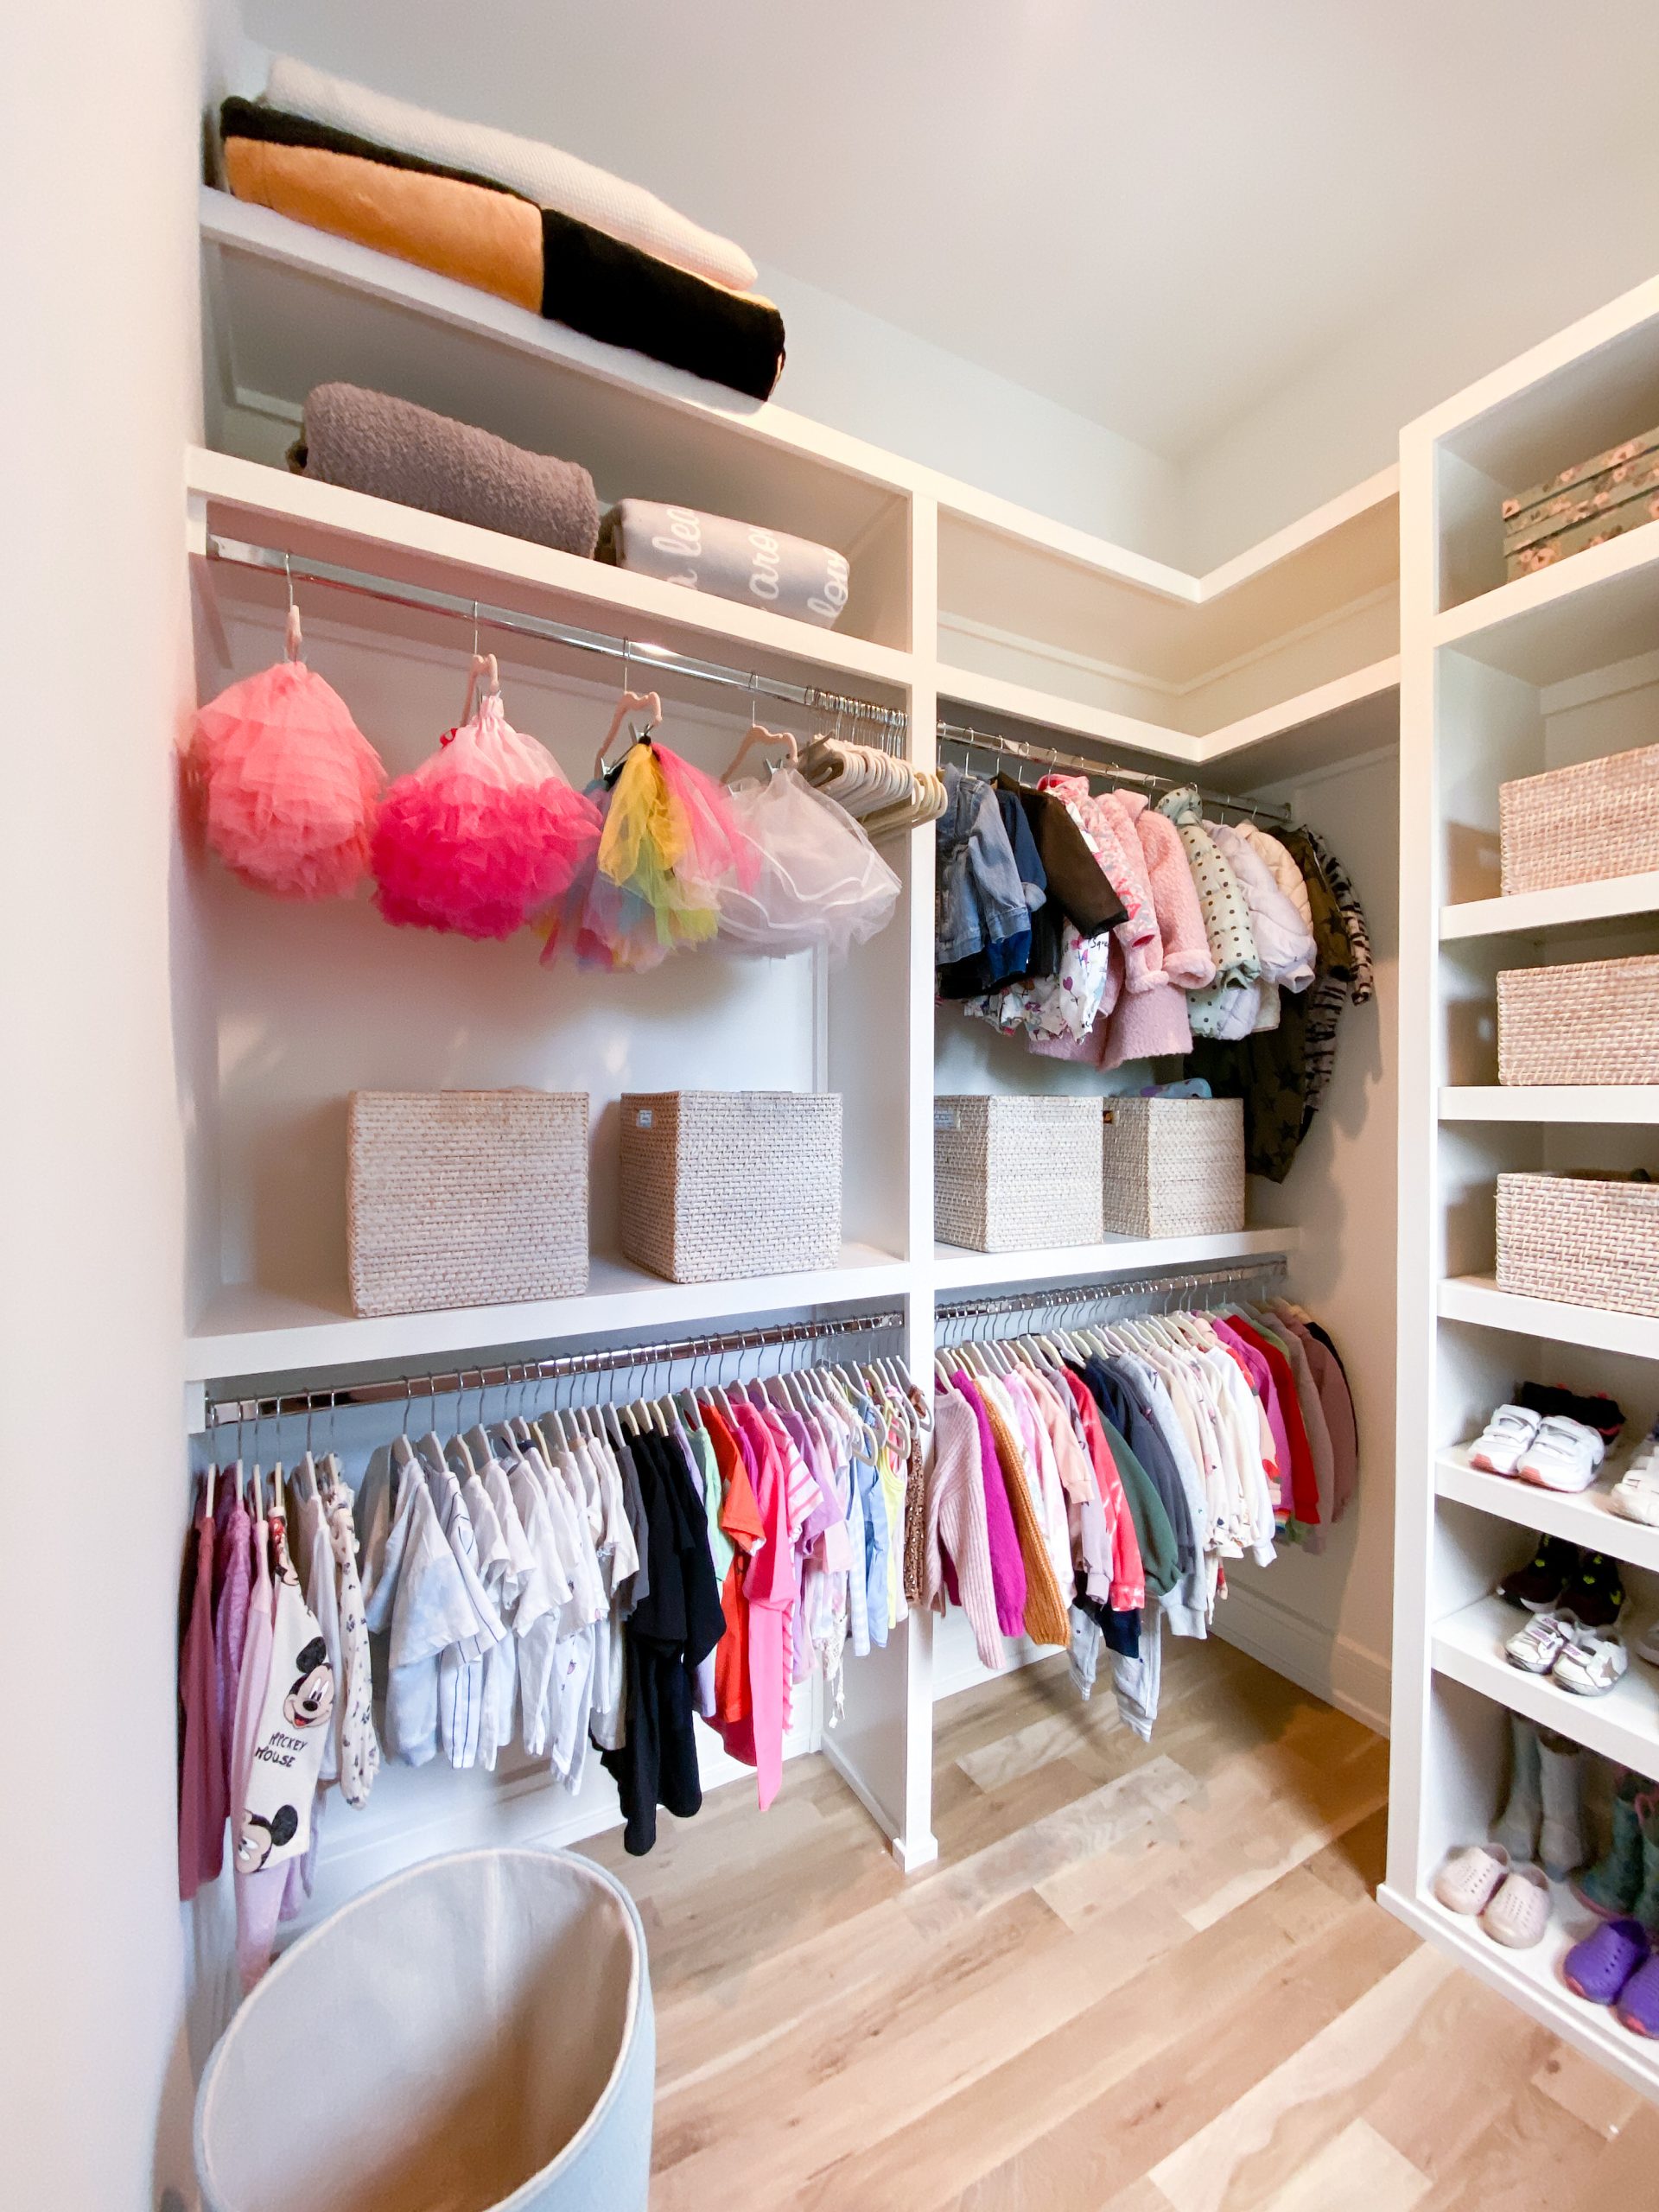 How to Organize a Kids' Bedroom